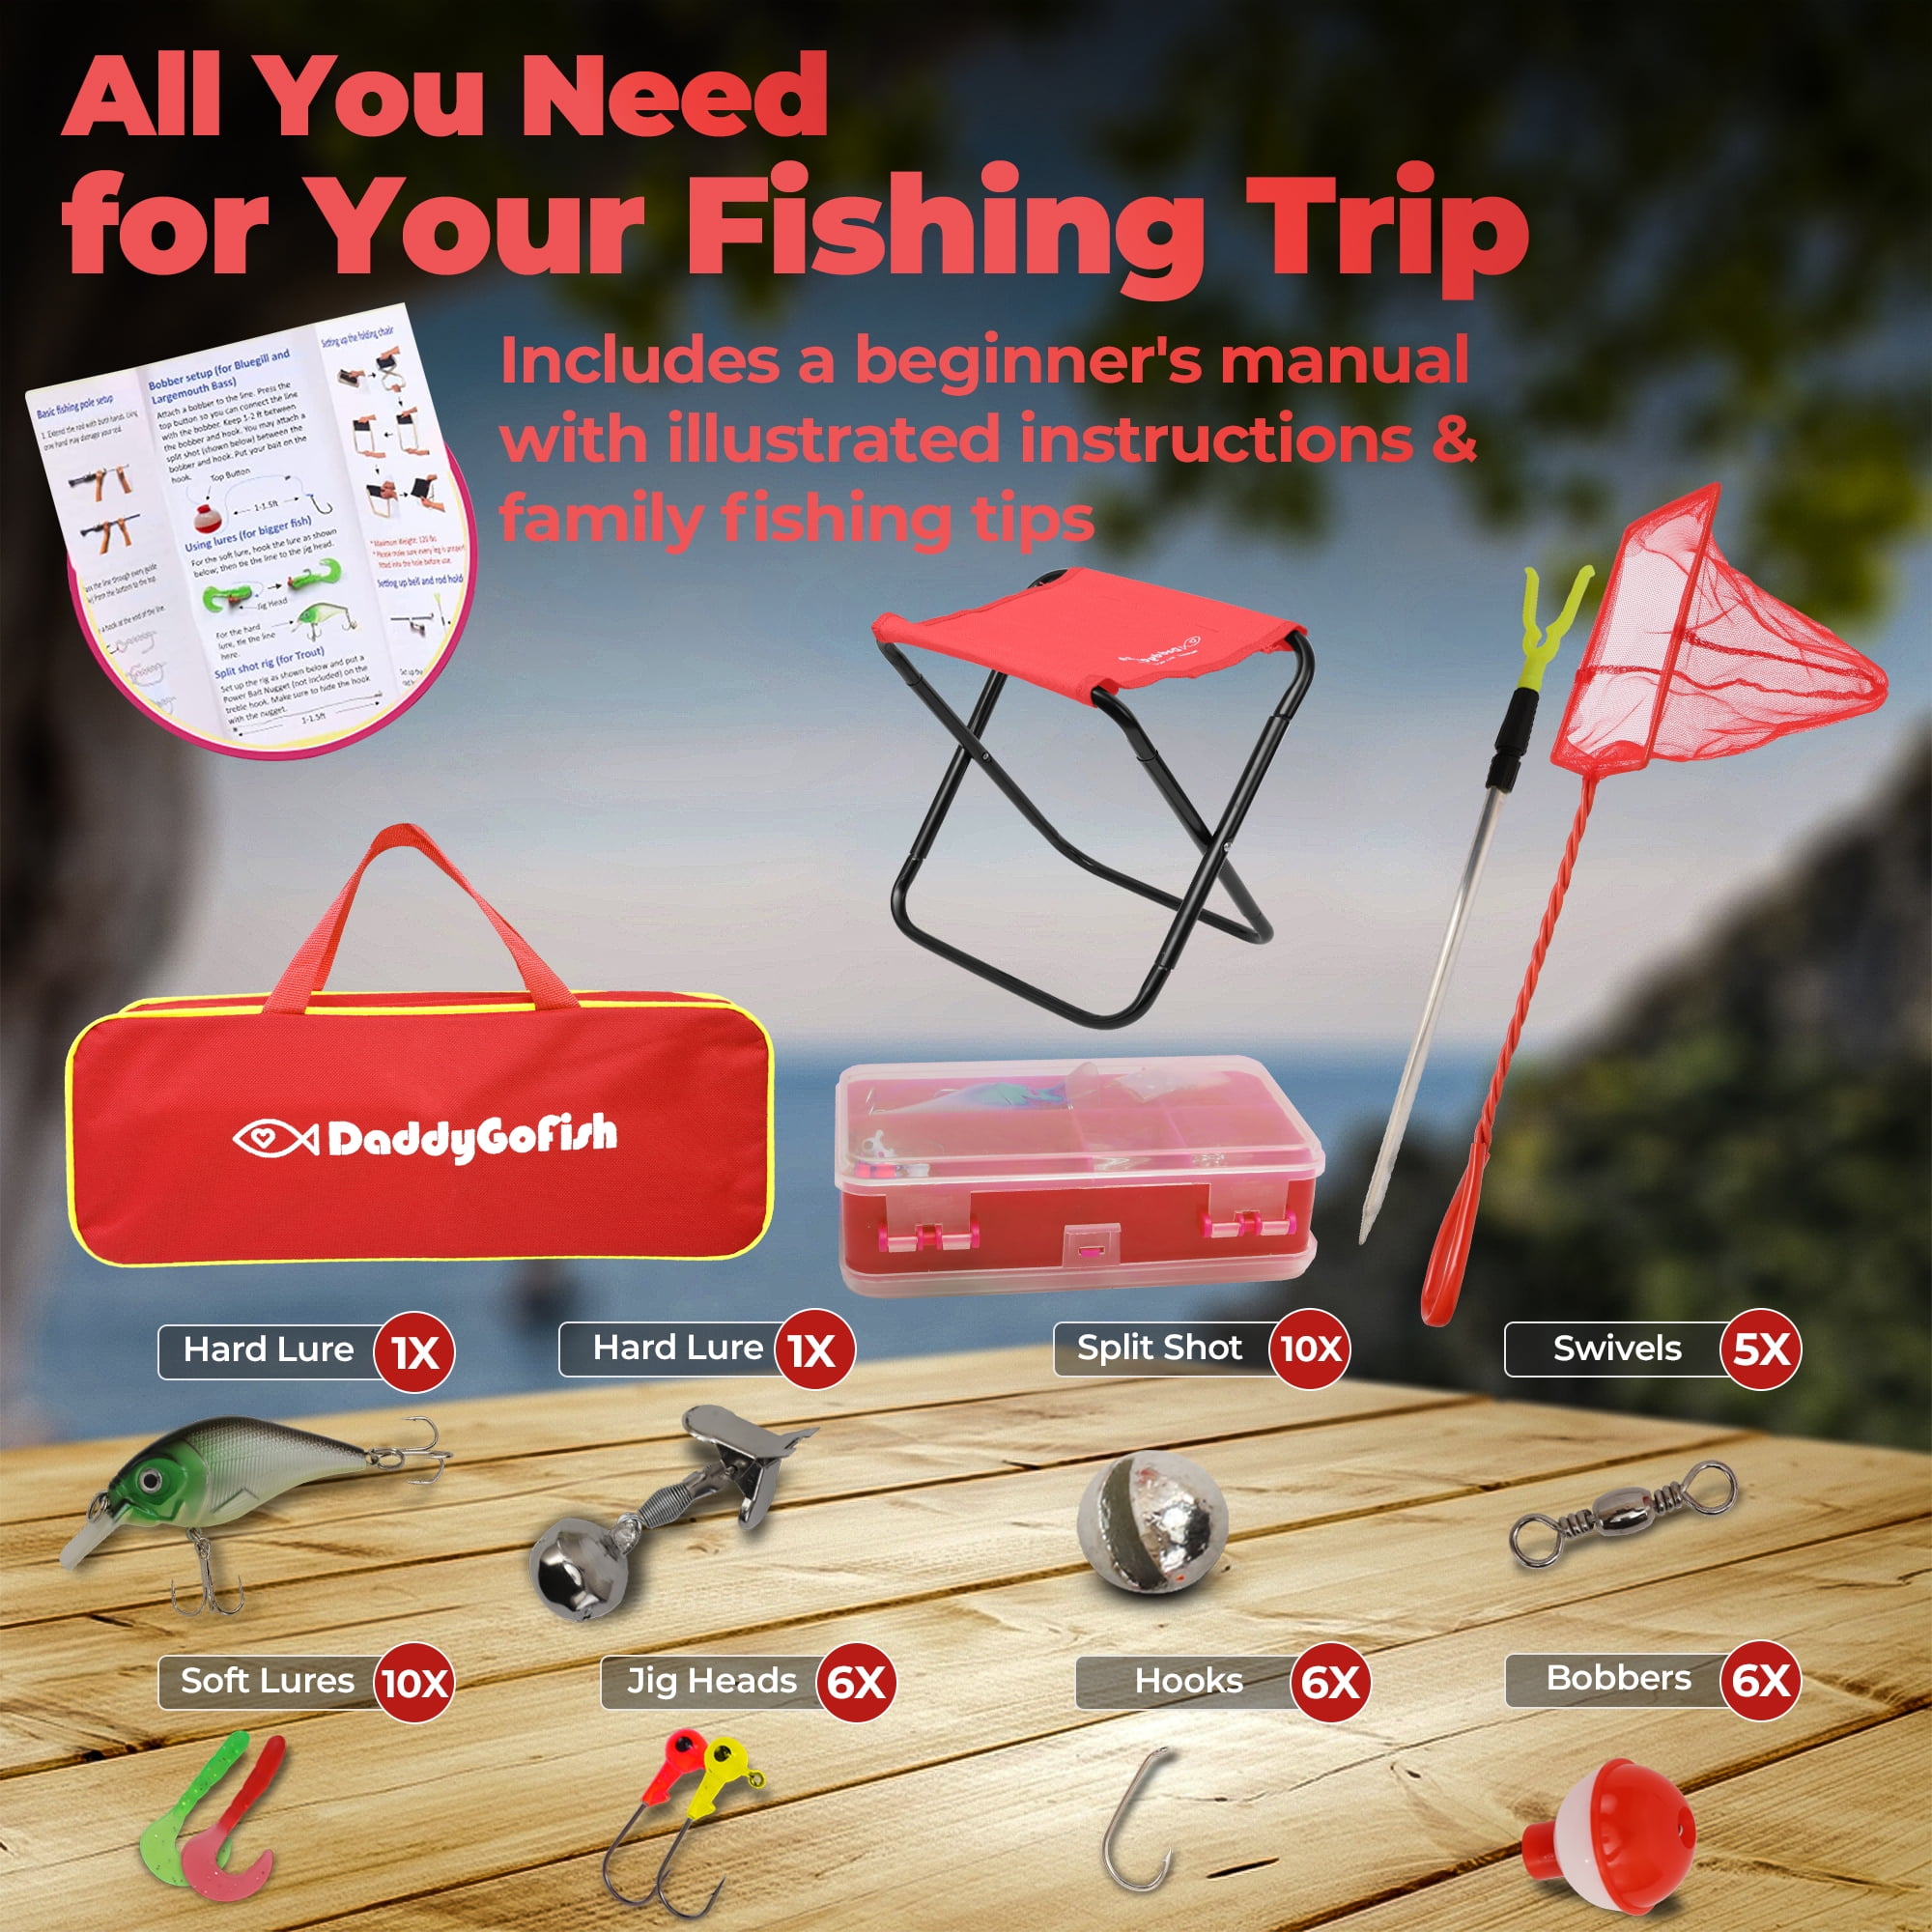 PartsVu - Get back to fishing with Yamaha! Shop Tackle Boxes, Downtriggers  & Outriggers, Pro Fishing Apparel, & more!